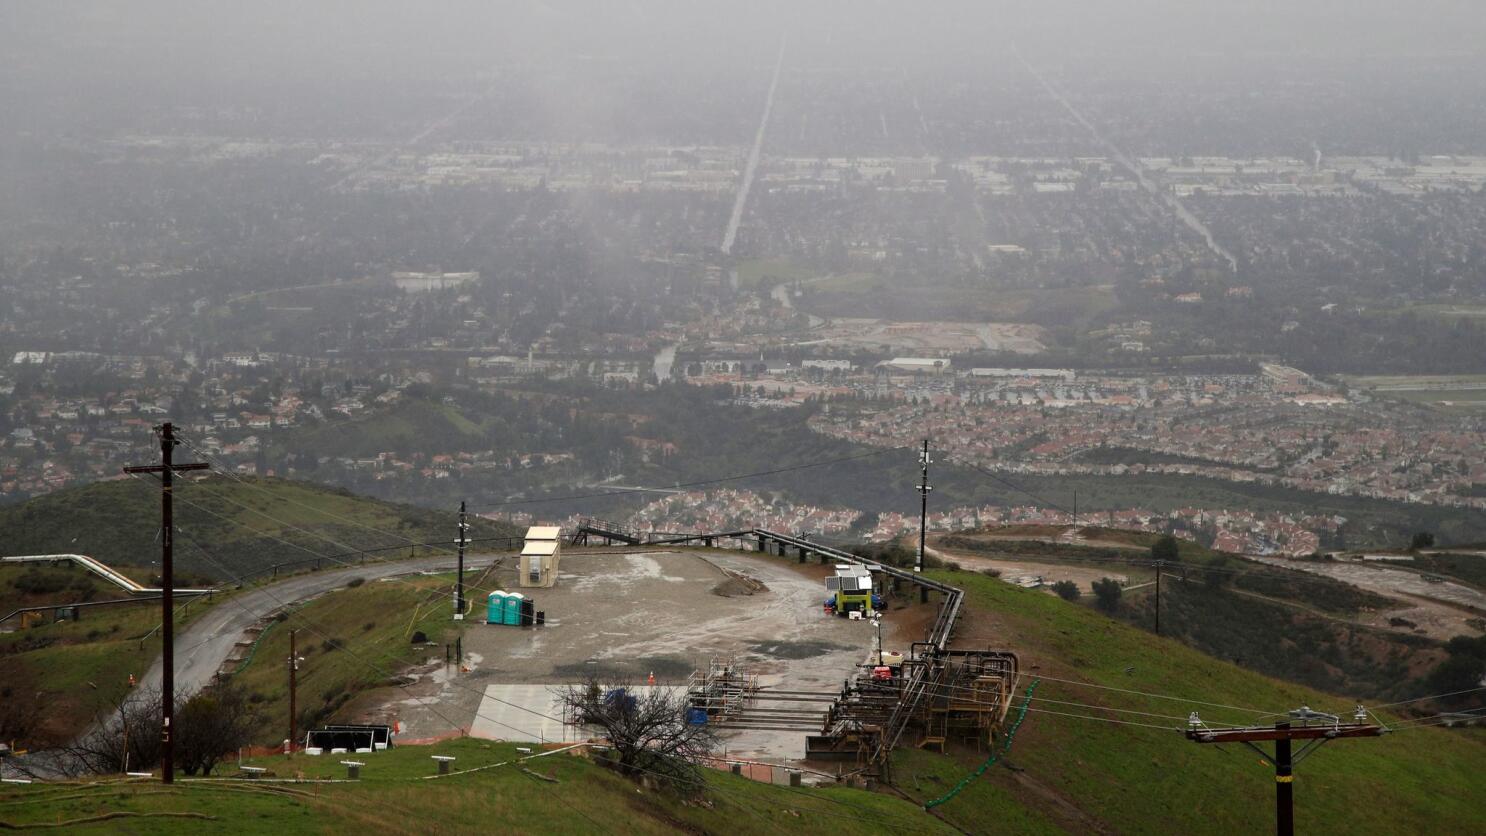 SoCal Gas Settles Claims From Aliso Canyon Gas Leak - The New York